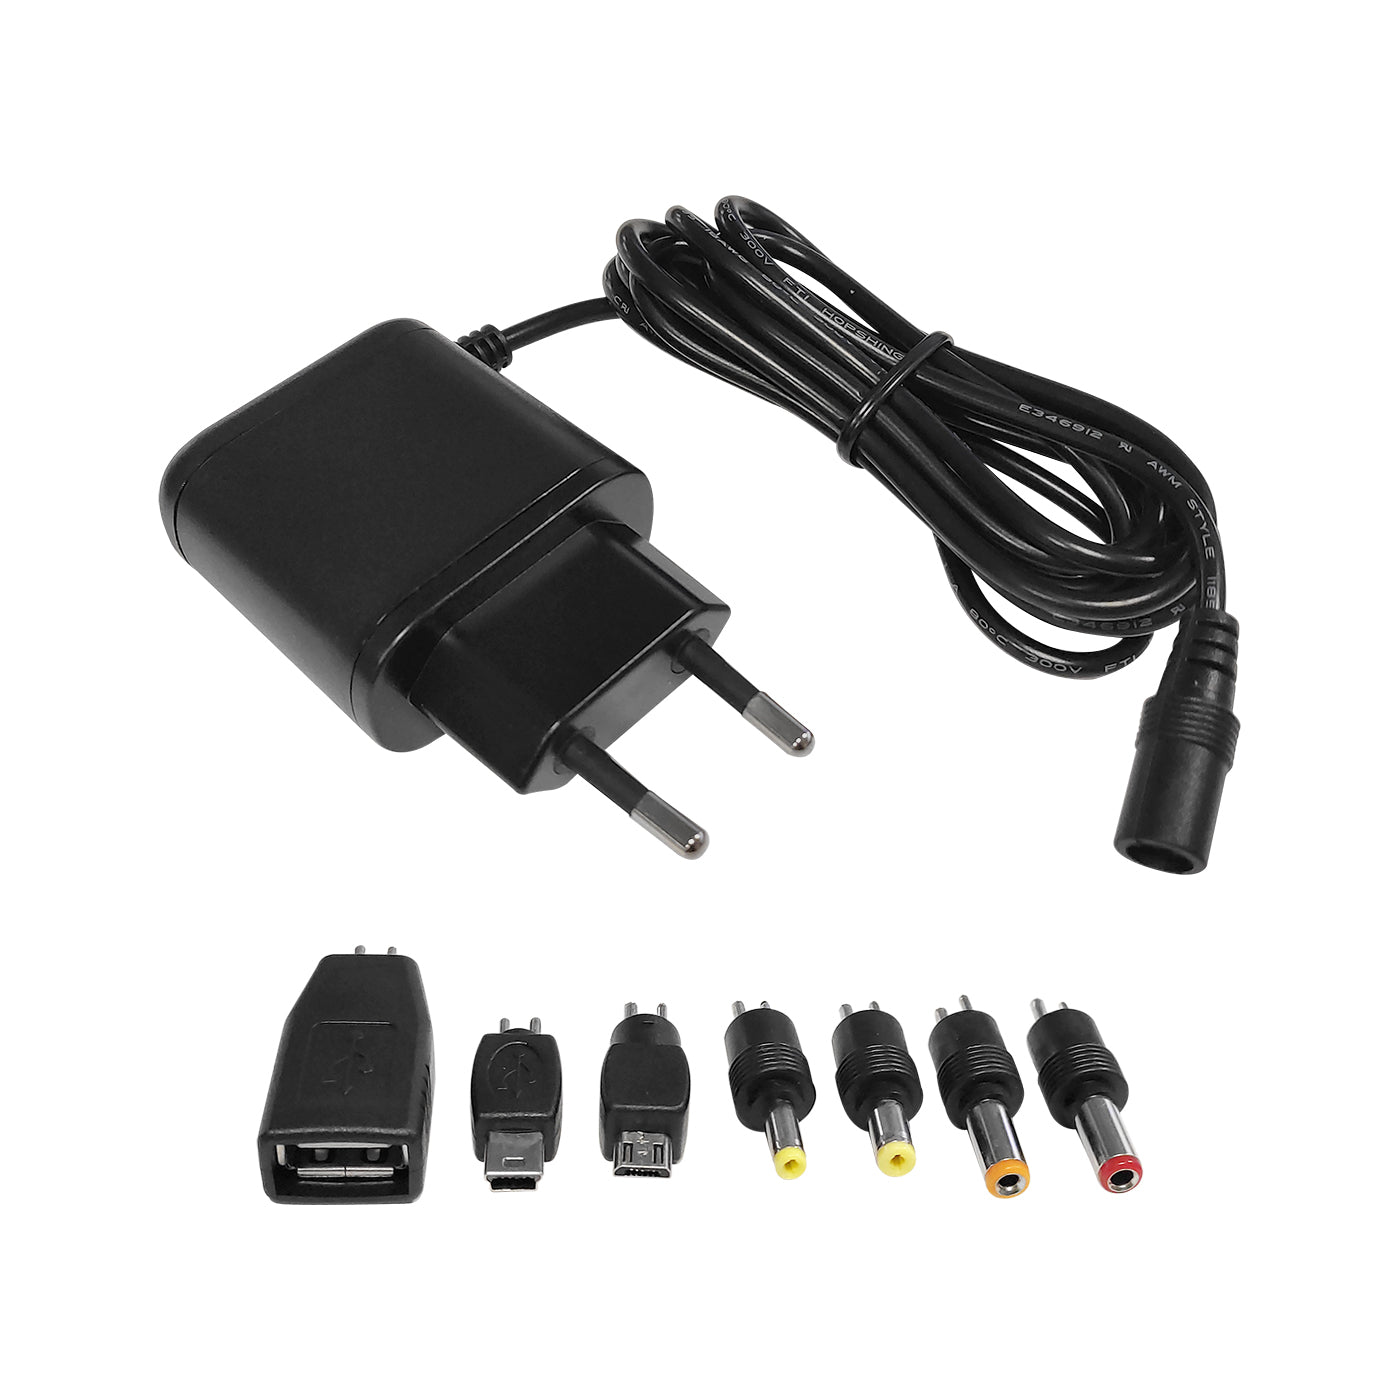 Alcapower 5V 2.5A Switching Power Supply, charger for iPods, MP3, MP4, power supply with 7 connectors